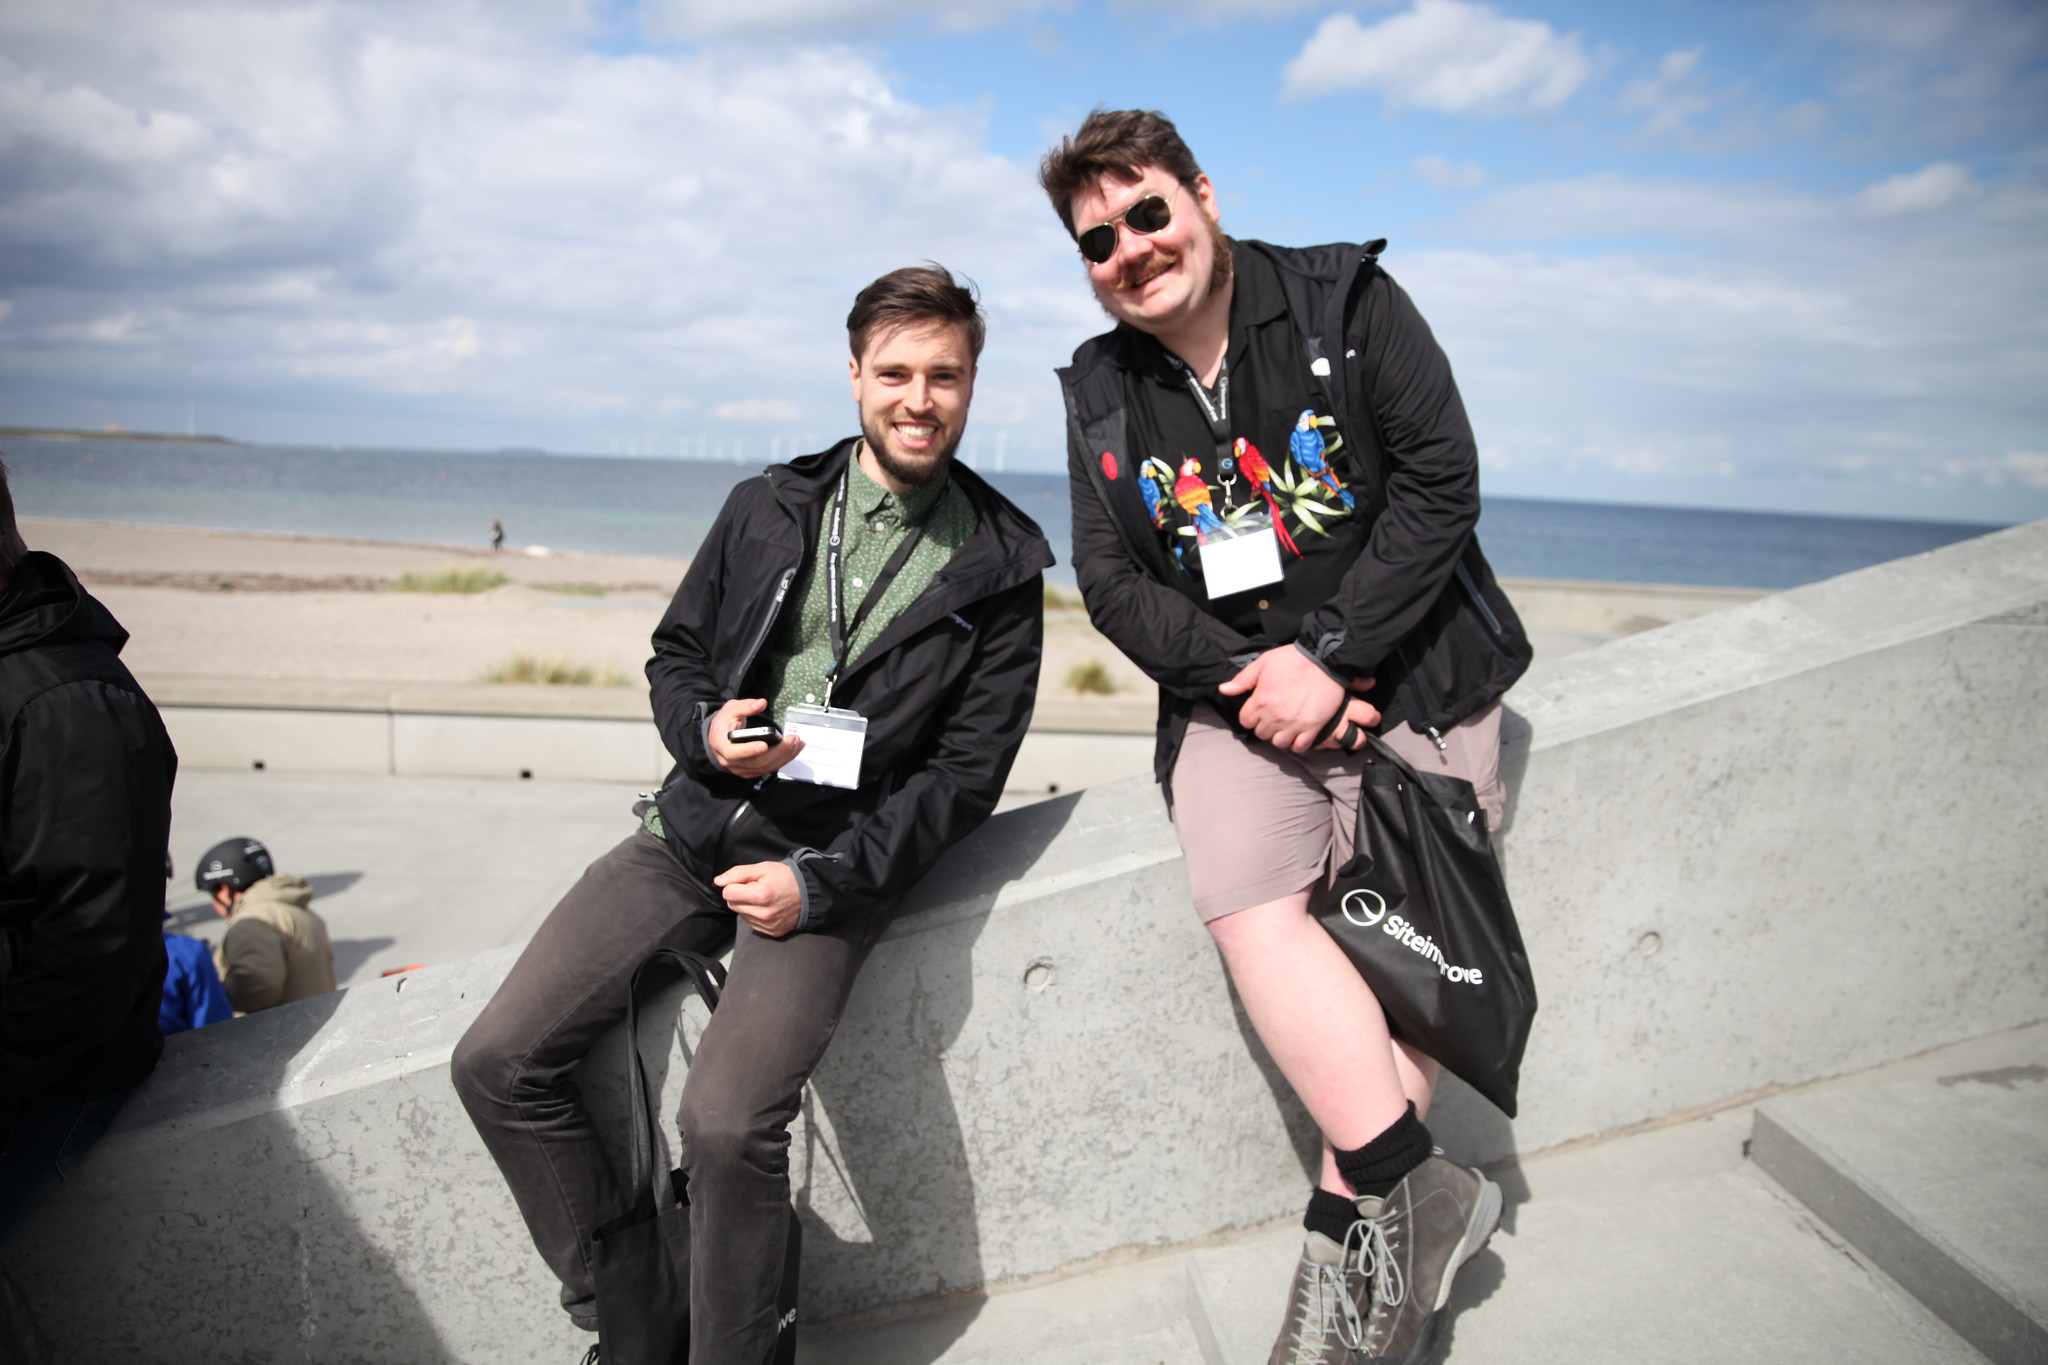 Two Siteimprove employees posing on a beach on GAAD 2015